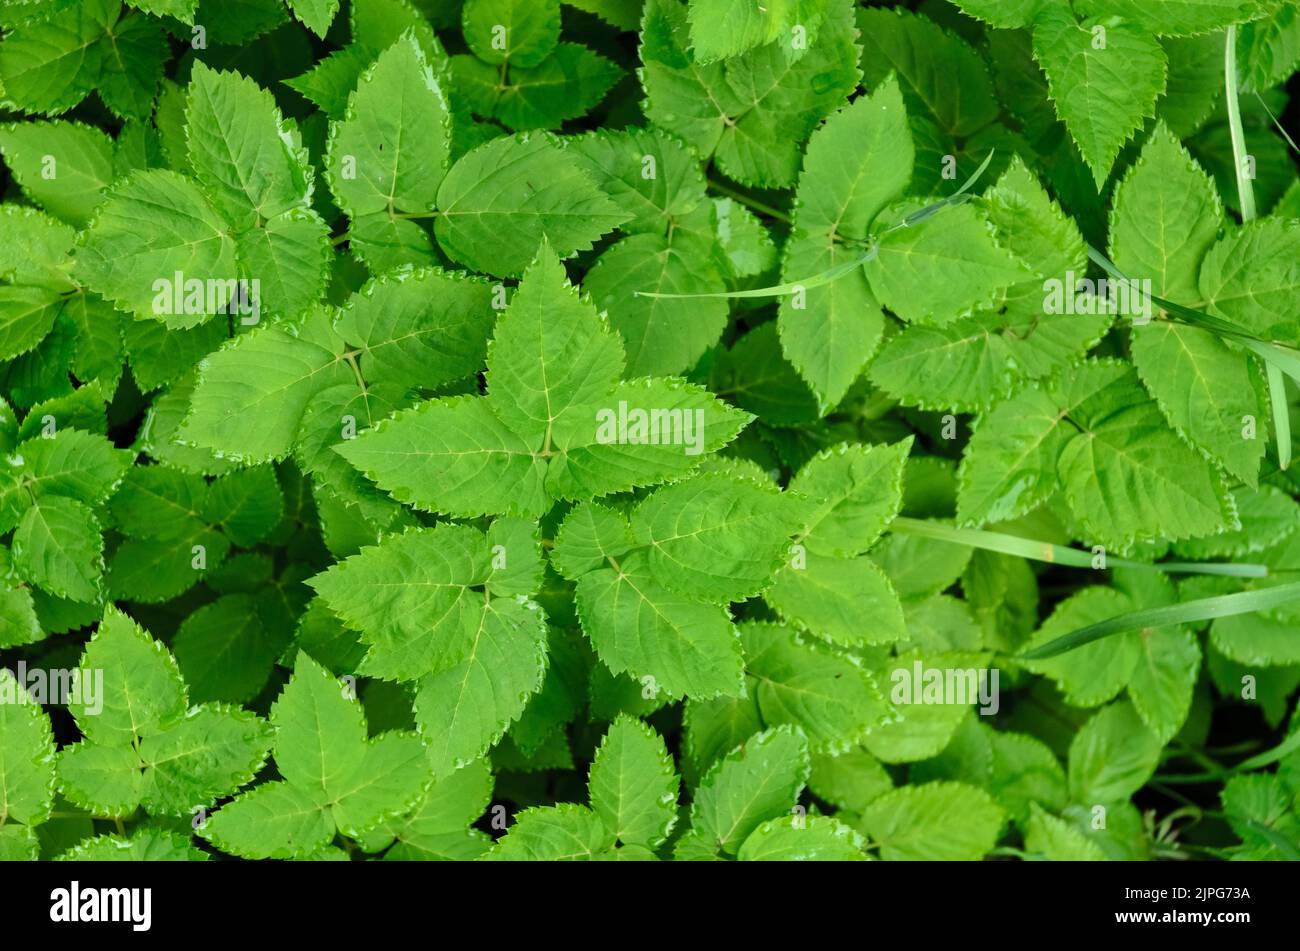 Aegopodium podagraria plant known as ground elder, herb gerard or bishop's weed in a forest in Germany Stock Photo